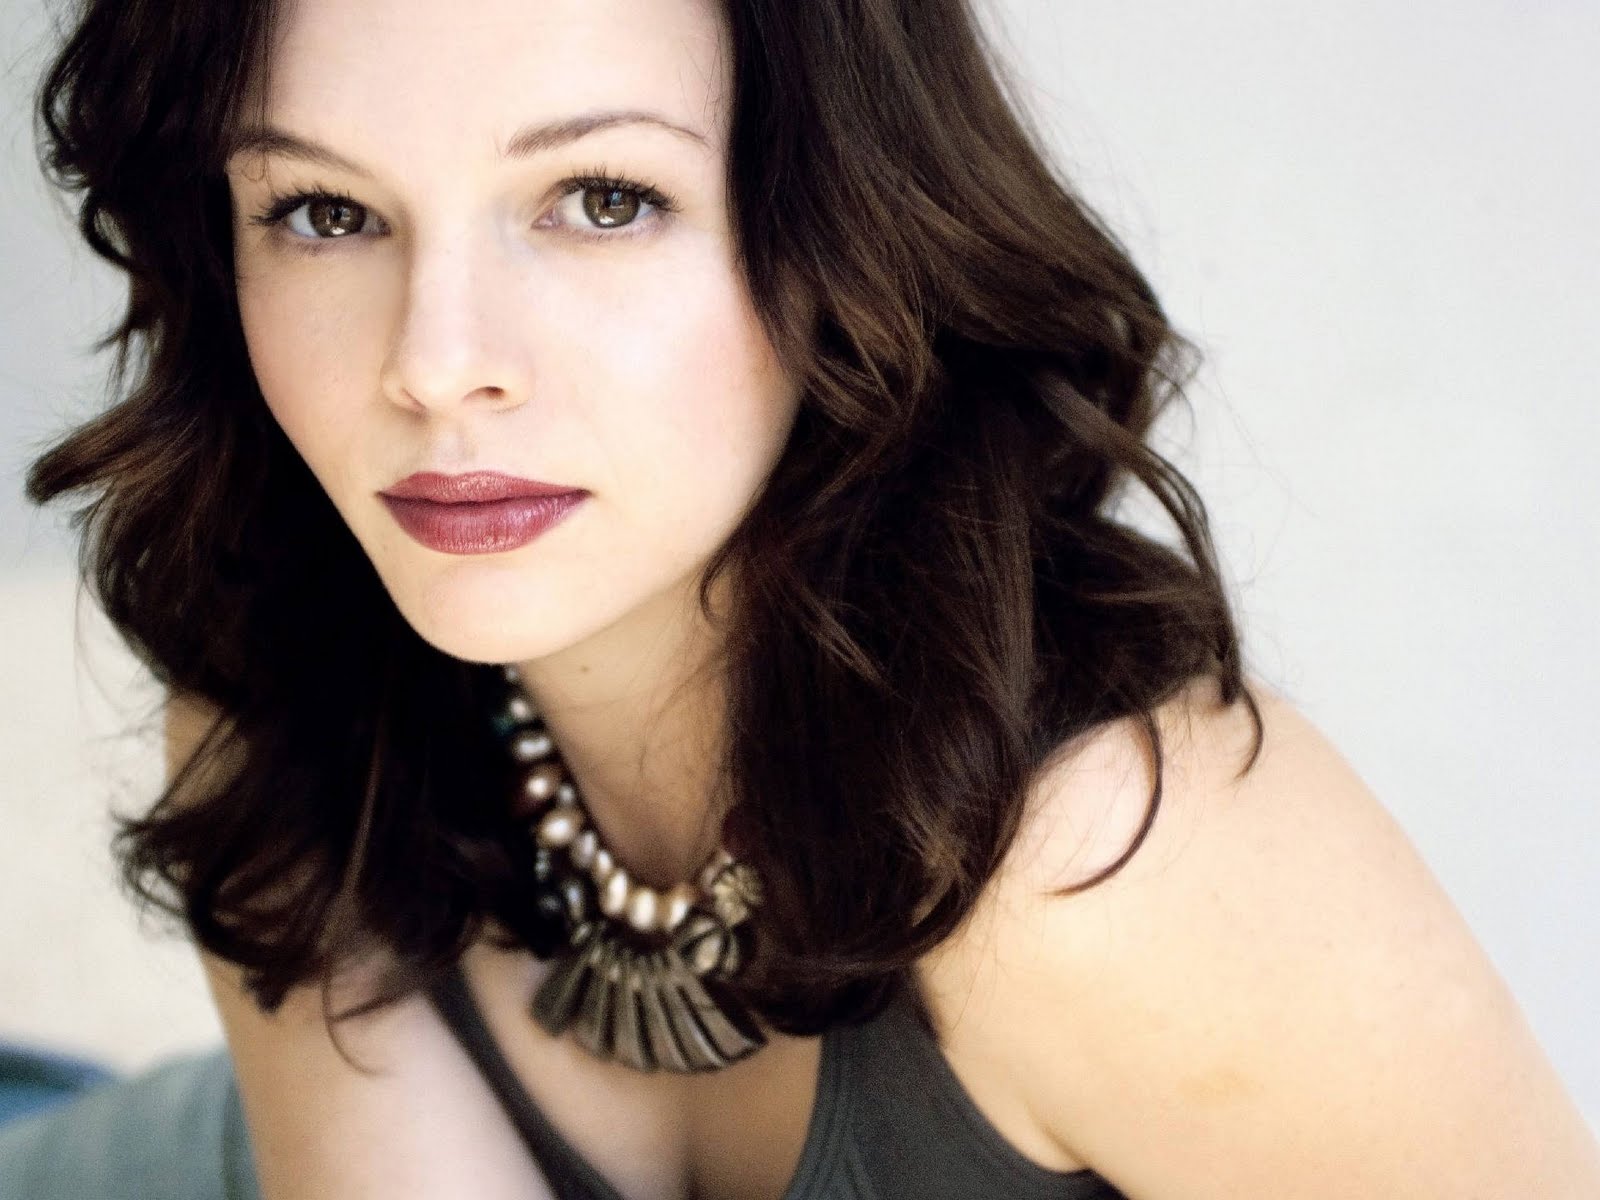 Booty Me Now: Amber Tamblyn Biography & Wallpapers